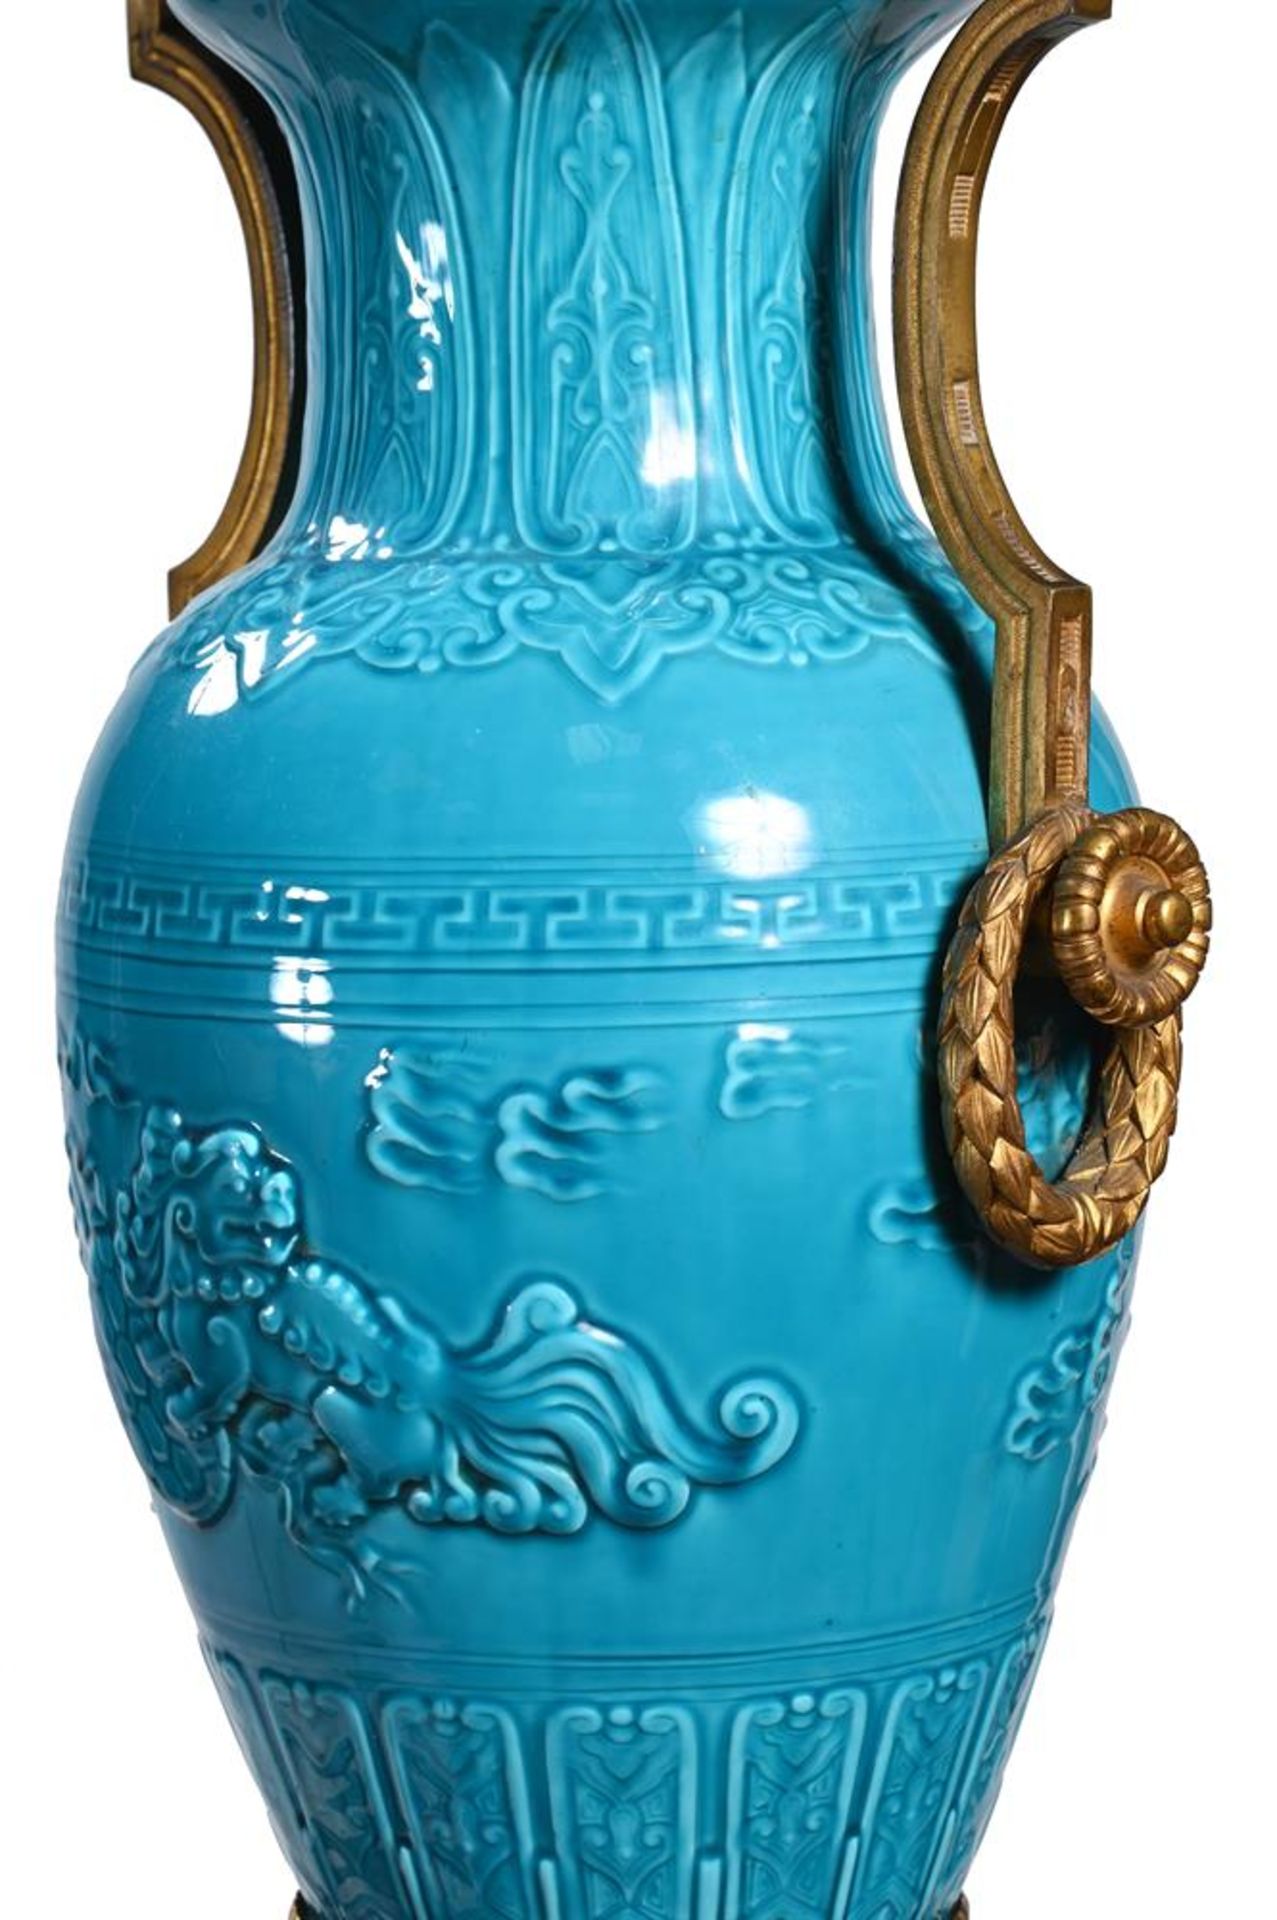 A FRENCH ORMOLU MOUNTED CHINOISERIE VASE, ATTRIBUTED TO THEODORE DECK, LATE 19TH CENTURY - Image 3 of 3